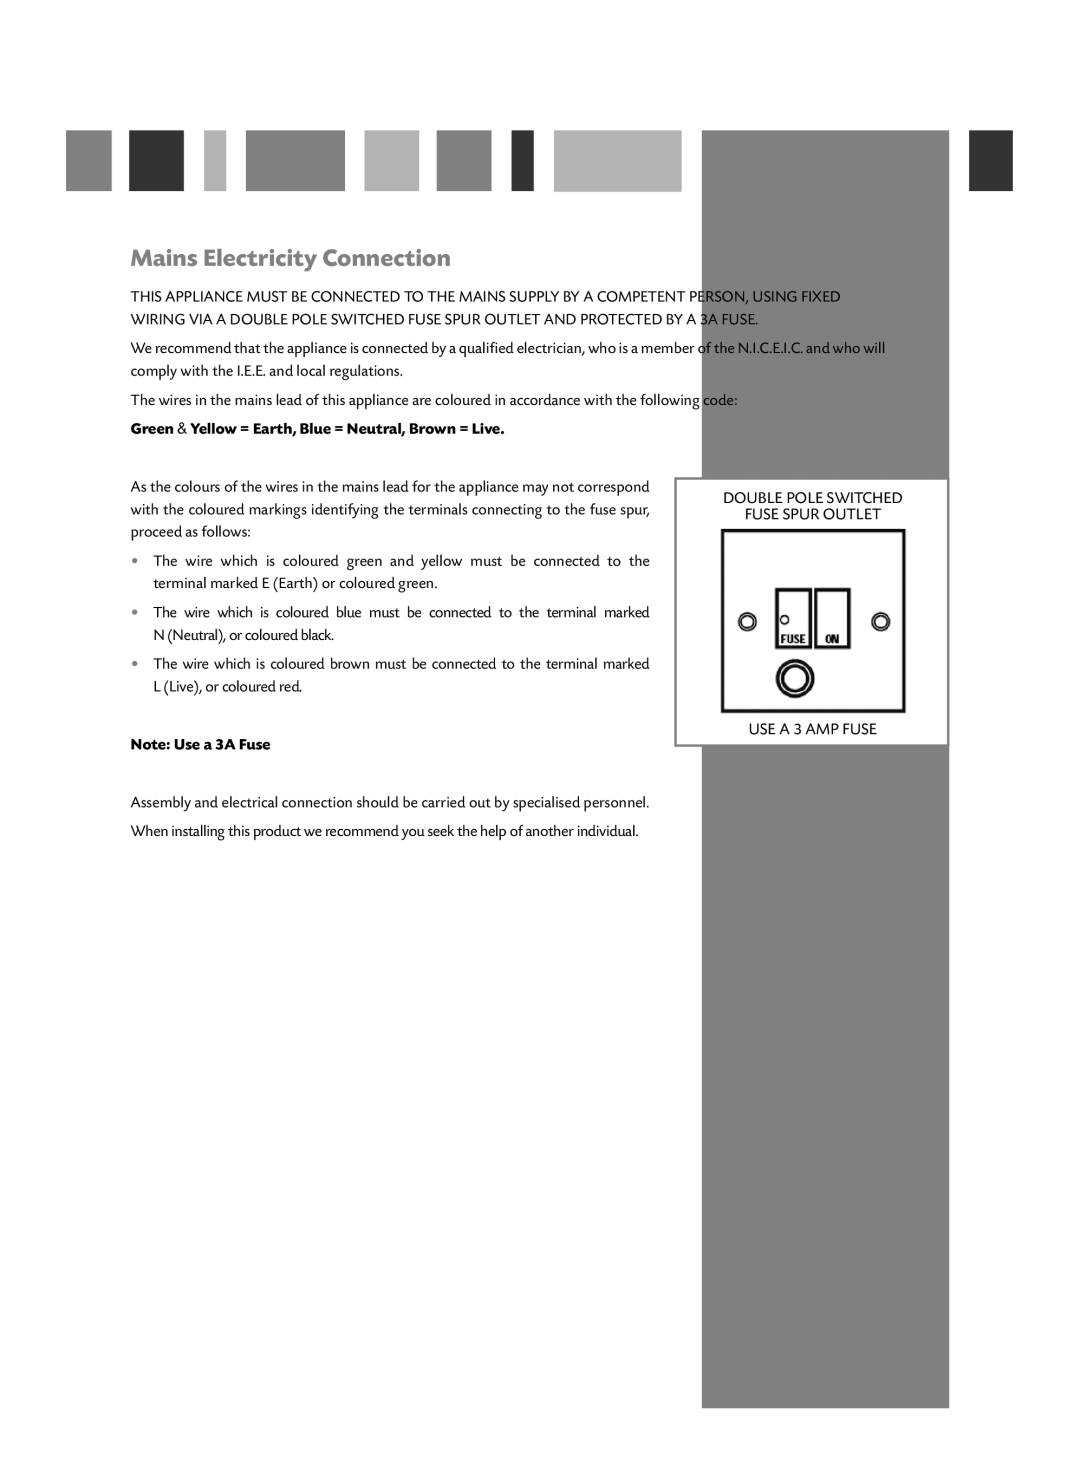 CDA HCG521 manual Mains Electricity Connection, Double Pole Switched Fuse Spur Outlet, USE A 3 AMP FUSE, Note Use a 3A Fuse 